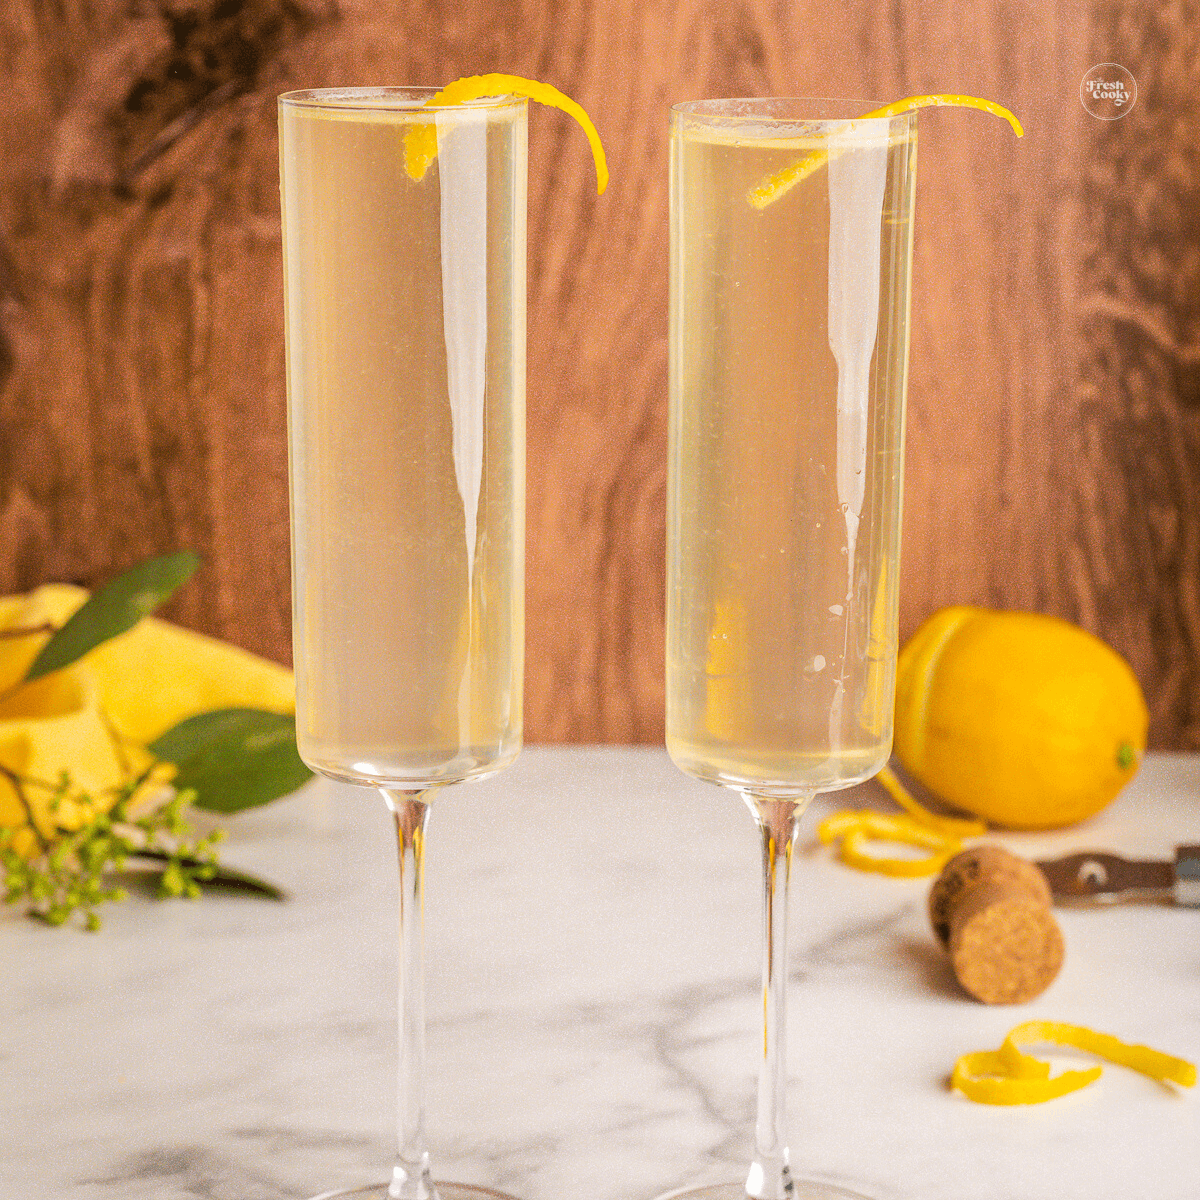 French 75 cocktail in champagne glasses garnished with a lemon twist.